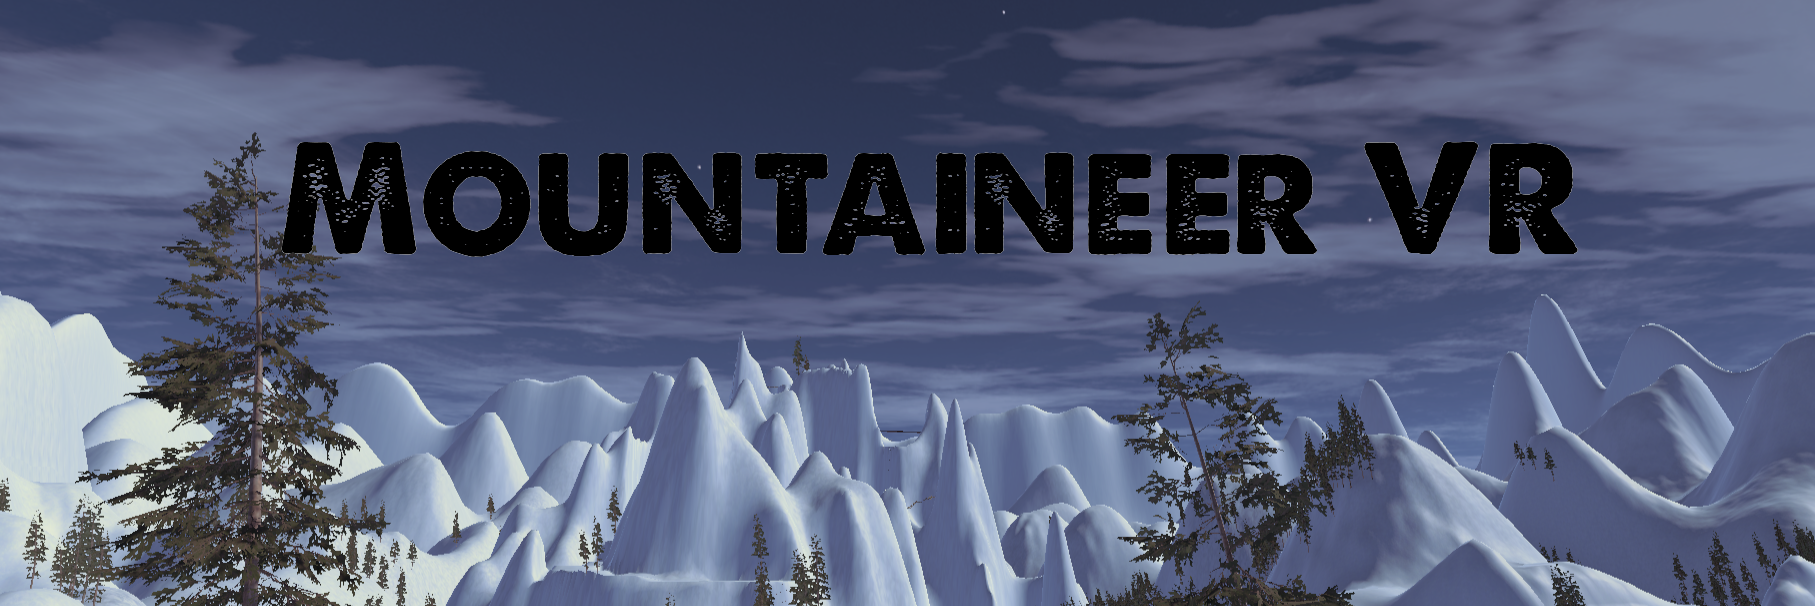 Mountaineer VR